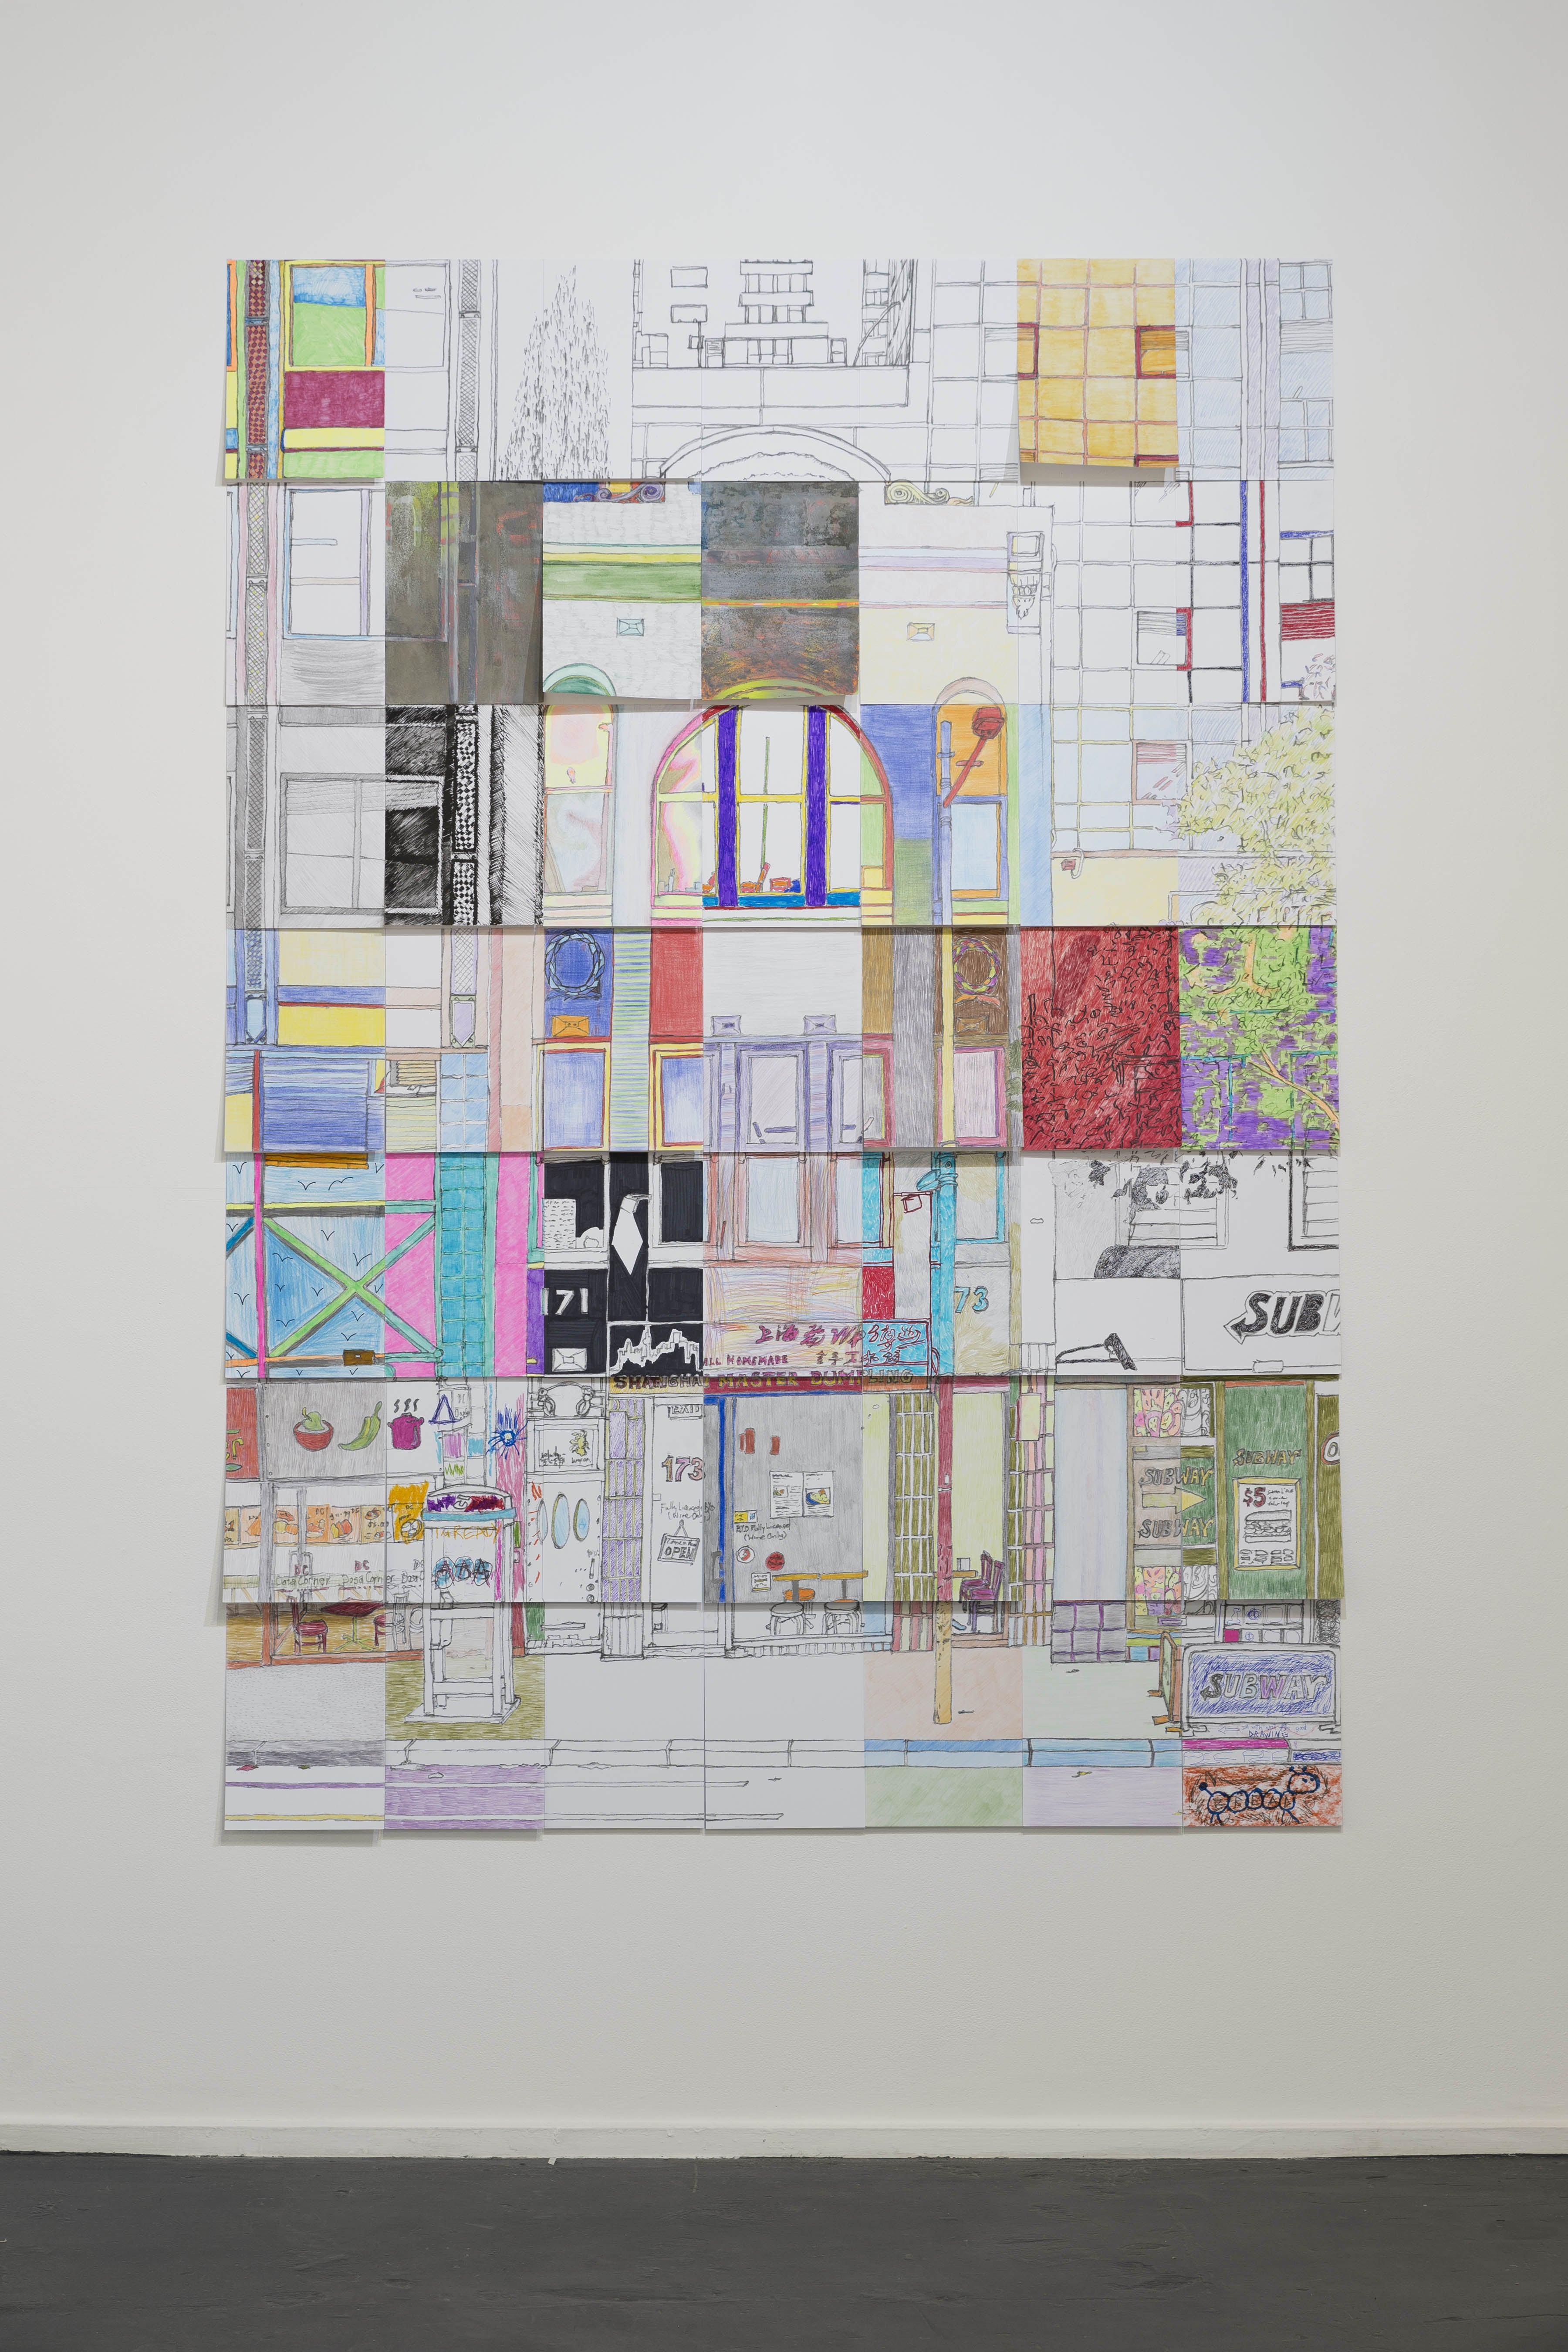 Image 02: Kim Donaldson with contributions by artists who have exhibited at KINGS, 'More than the sum of its parts' (2018), digital print on paper with mixed media. Photo: Chris Bowes.